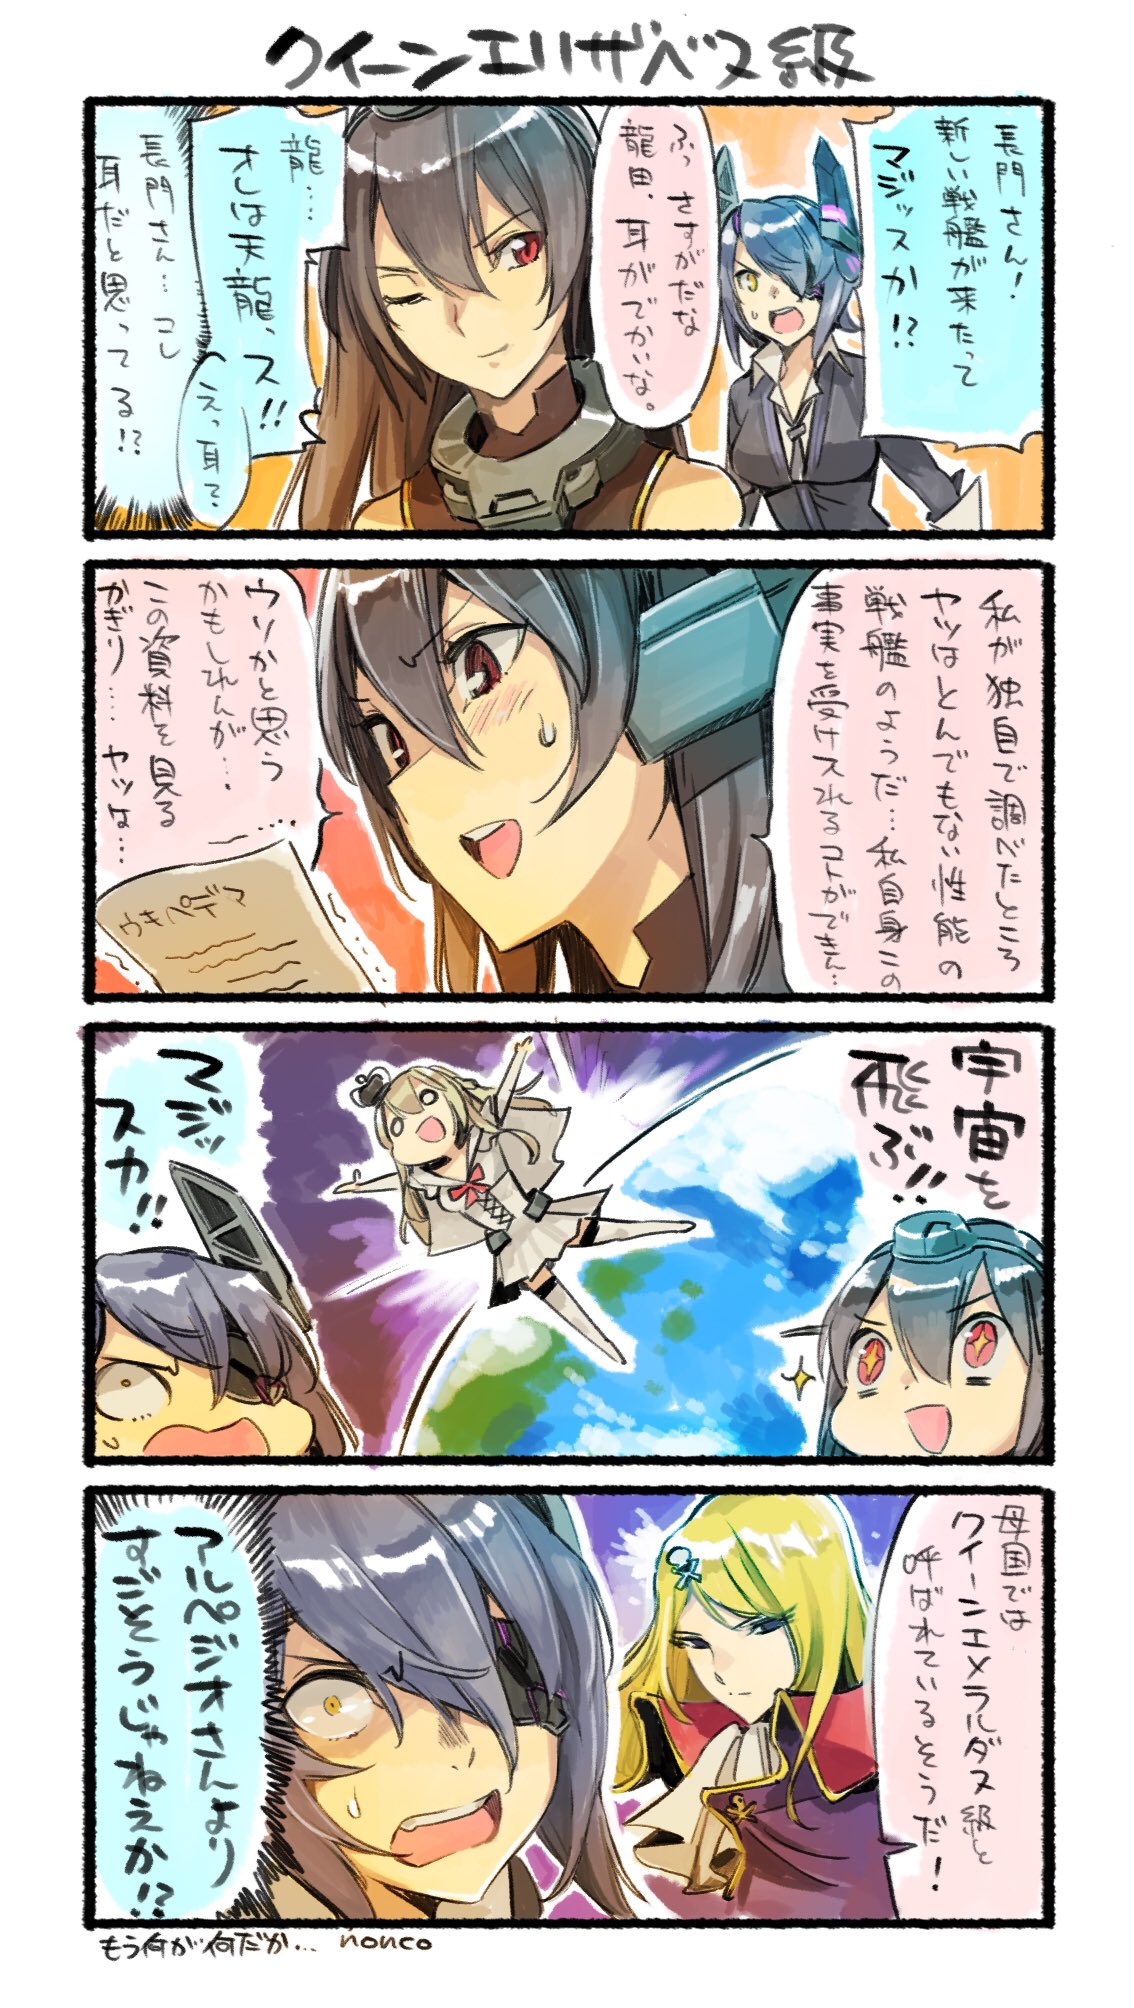 +_+ 4girls 4koma artist_name ascot blank_eyes blonde_hair bow breasts brown_hair cape collar comic commentary_request cosplay dress earth elbow_gloves emeraldas emeraldas_(cosplay) eyepatch gloves hair_over_one_eye harlock_saga headgear highres holding_paper kantai_collection large_breasts matsumoto_leiji_(style) multiple_girls nagato_(kantai_collection) necktie nonco off_shoulder one_eye_closed open_mouth outstretched_arms purple_hair queen_emeraldas red_eyes shirt sidelocks skull_and_crossbones sleeveless sleeveless_shirt space spread_arms strapless strapless_dress sweatdrop sweater tenryuu_(kantai_collection) thigh-highs translated warspite_(kantai_collection) wide-eyed yellow_eyes